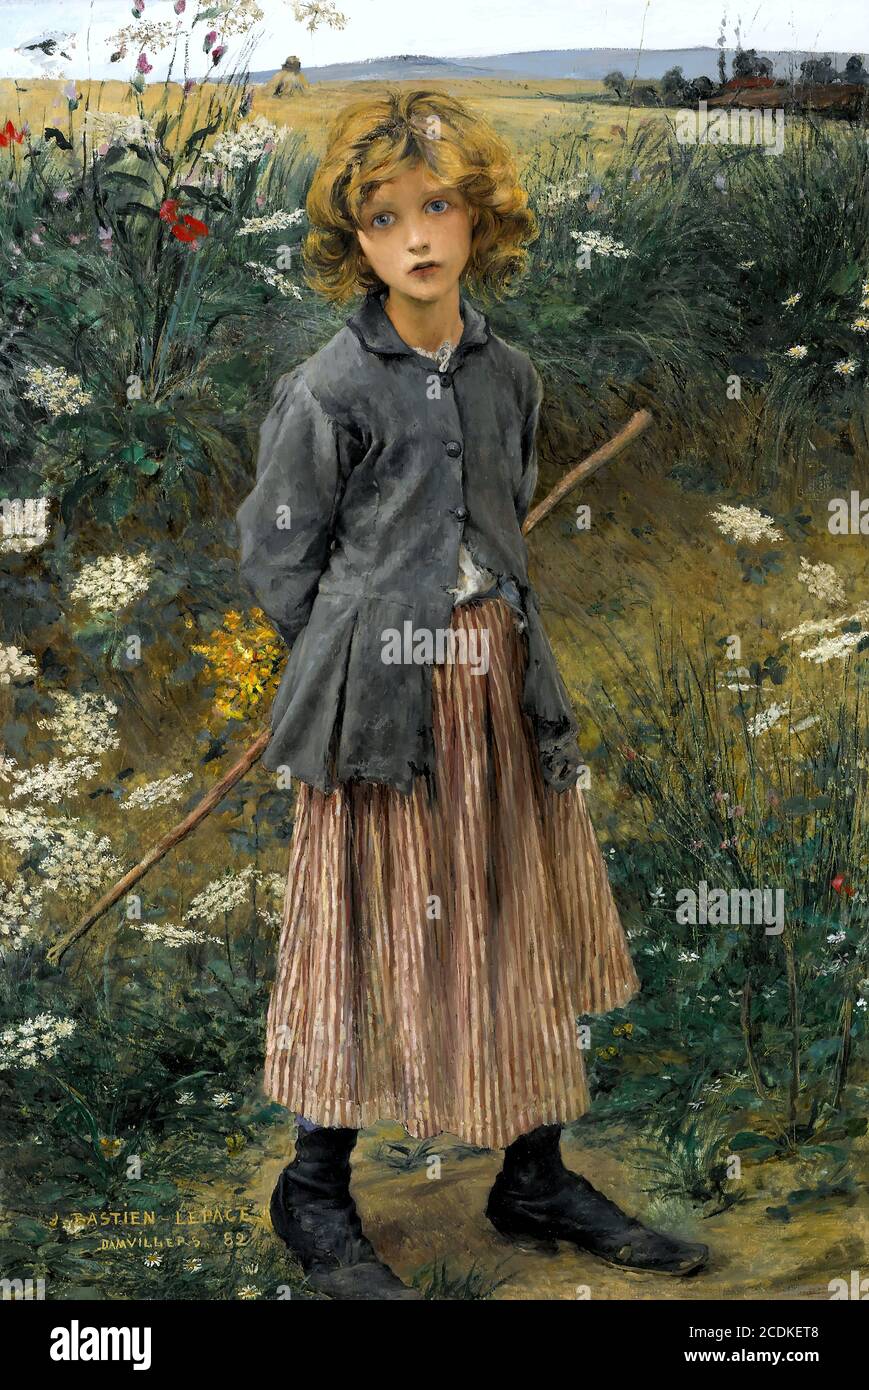 Bastien-Lepage Jules - Roadside Flowers (the Little Shepherdess) - French School - 19th and Early 20th Century Stock Photo